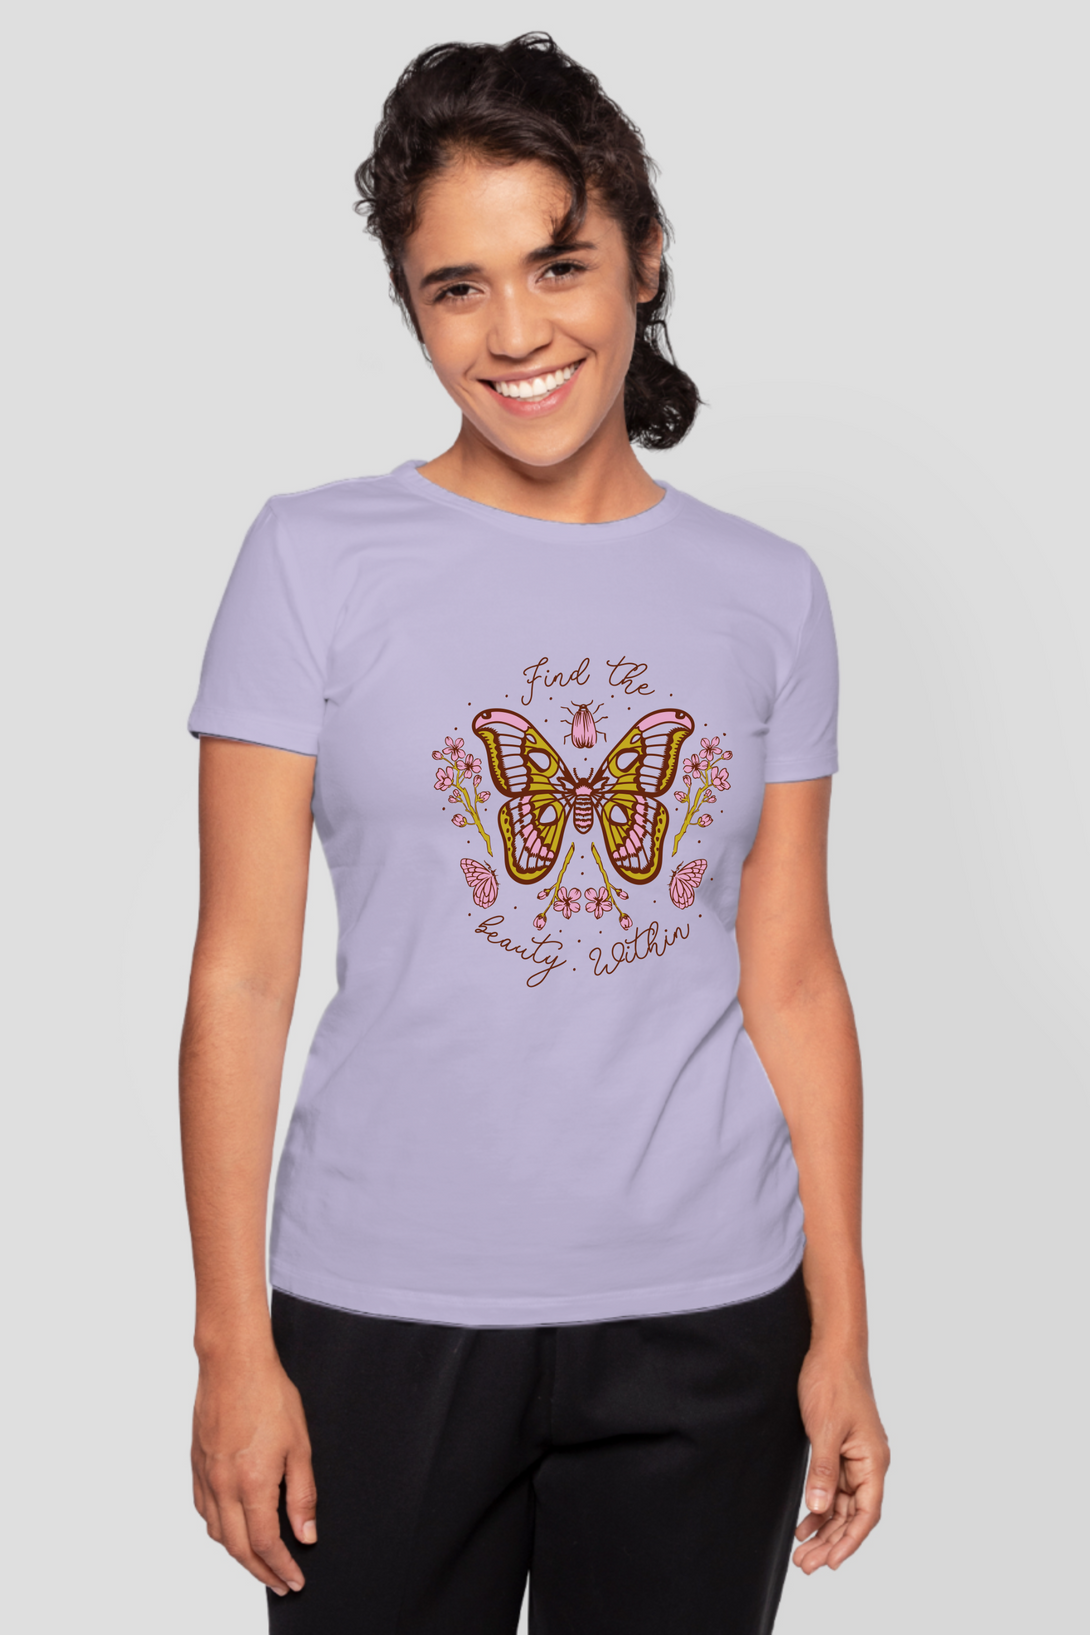 Find The Beauty Within Printed T-Shirt For Women - WowWaves - 9